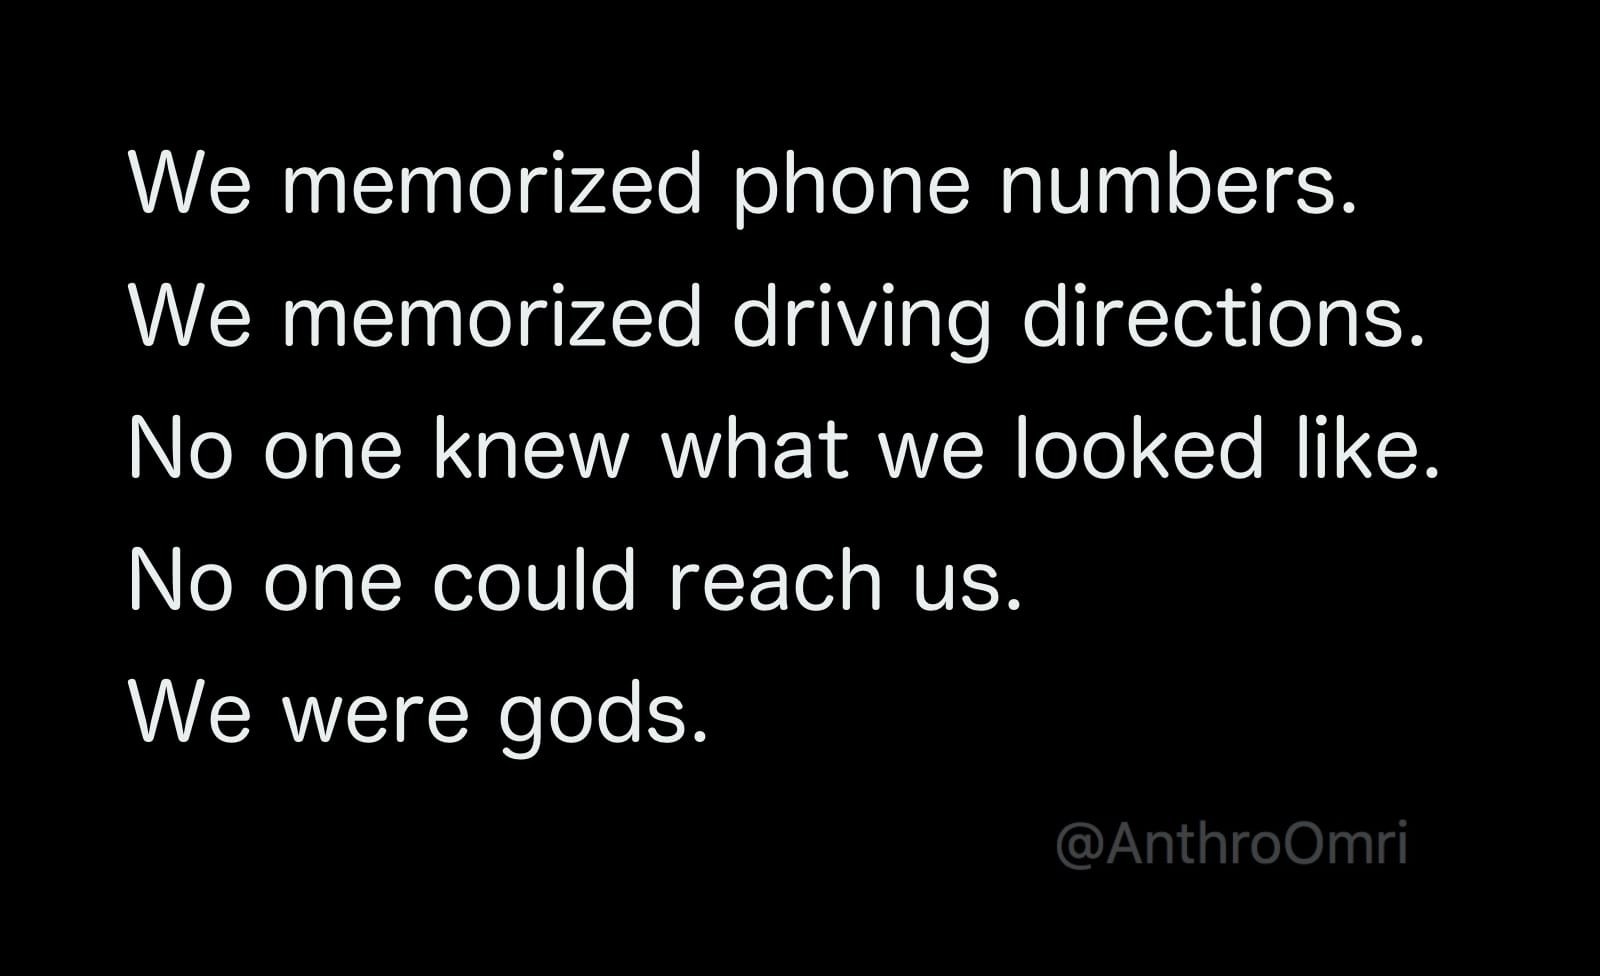 tweet: We memorized phone numbers. We memorized driving directions. No one knew what we looked like. No one could reach us. We were gods.